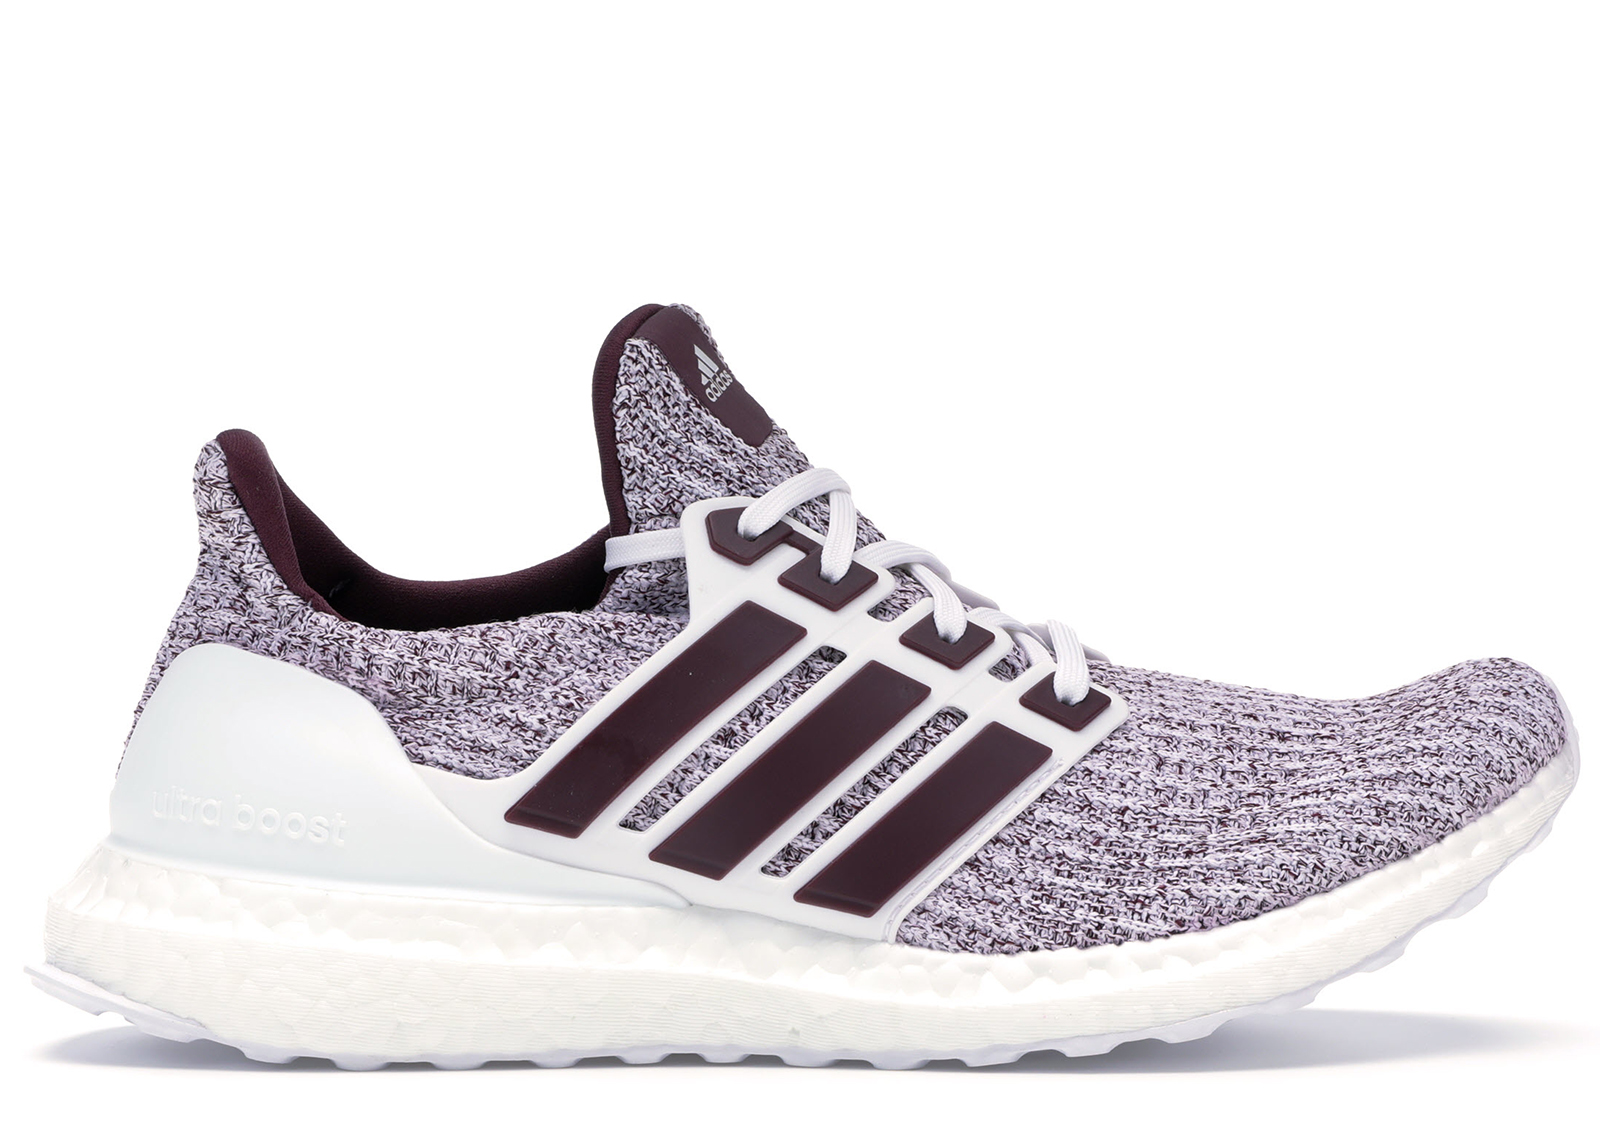 adidas pure boost maroon shoes